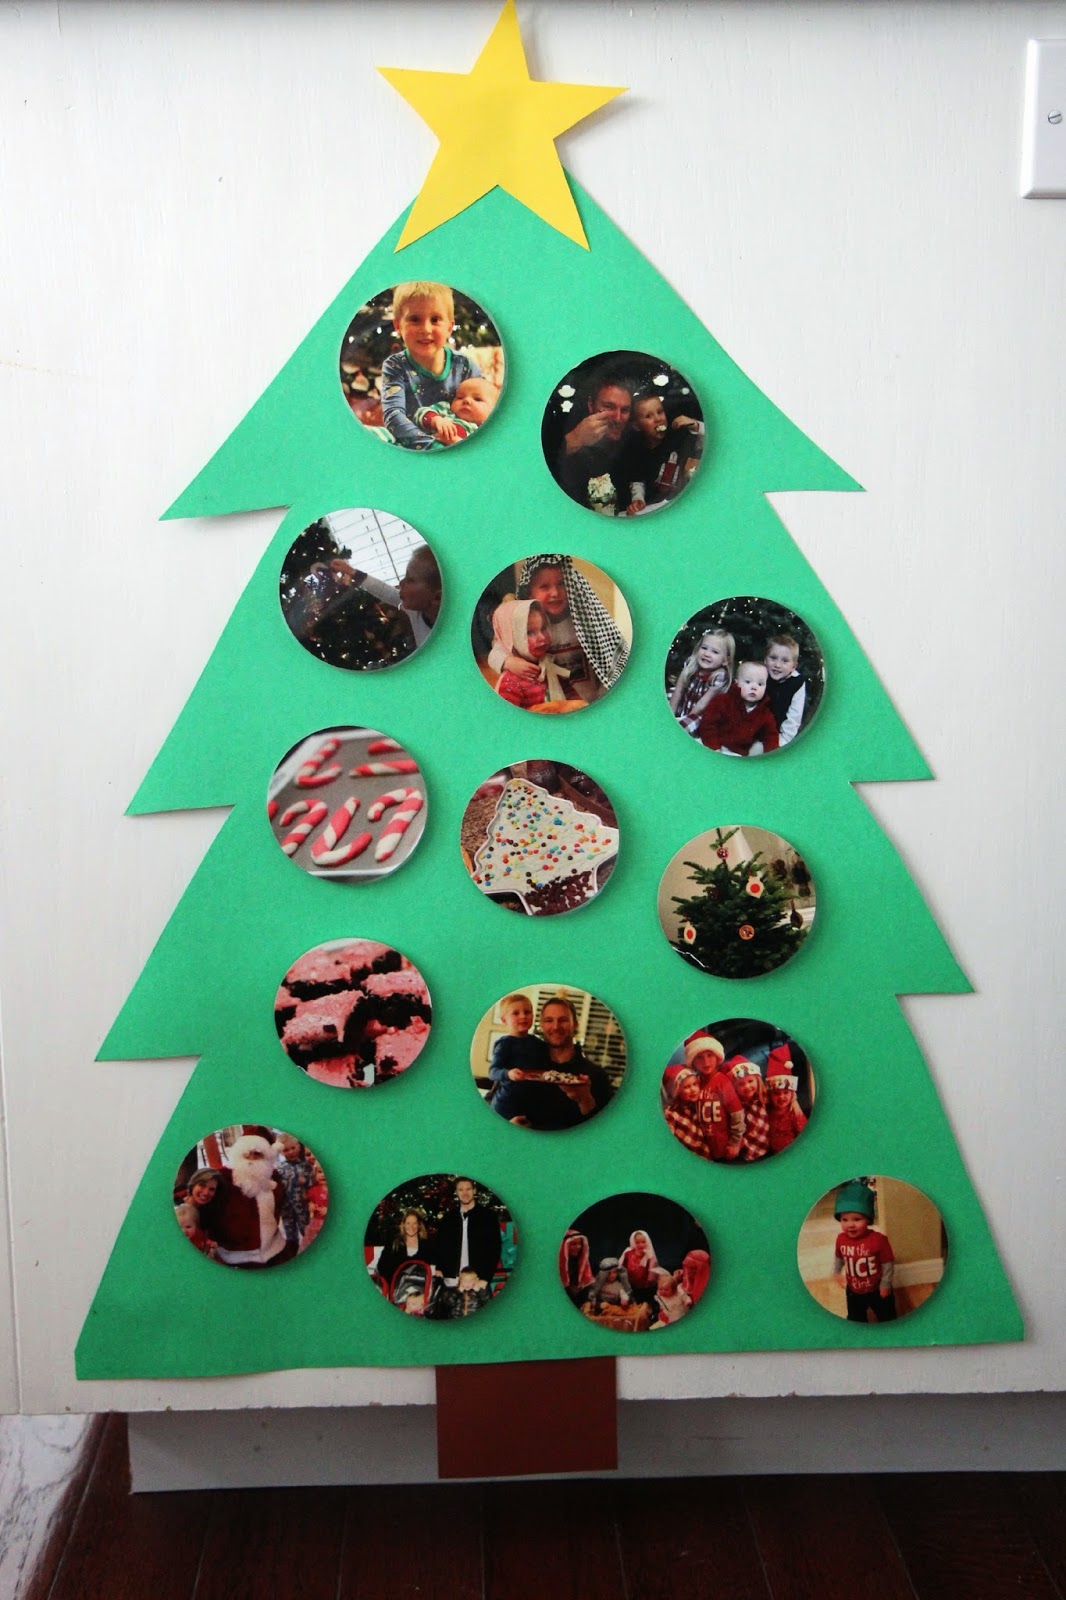 Toddler Approved!: Build a Photo Christmas Tree for Babies 